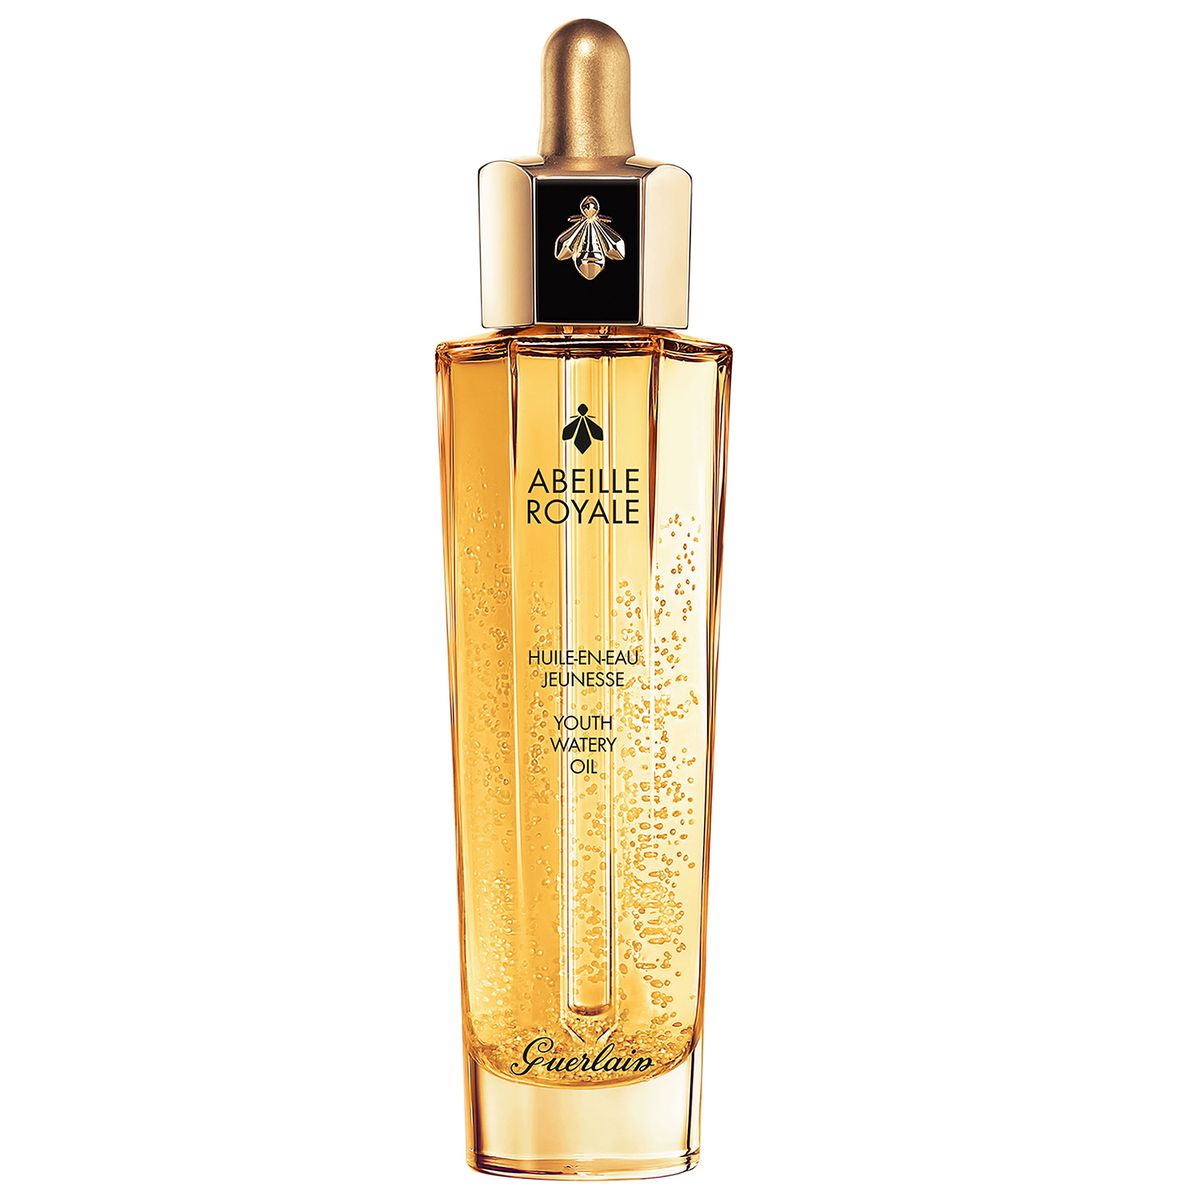 GUERLAIN Abeille Royale Anti-Aging Youth Watery Oil